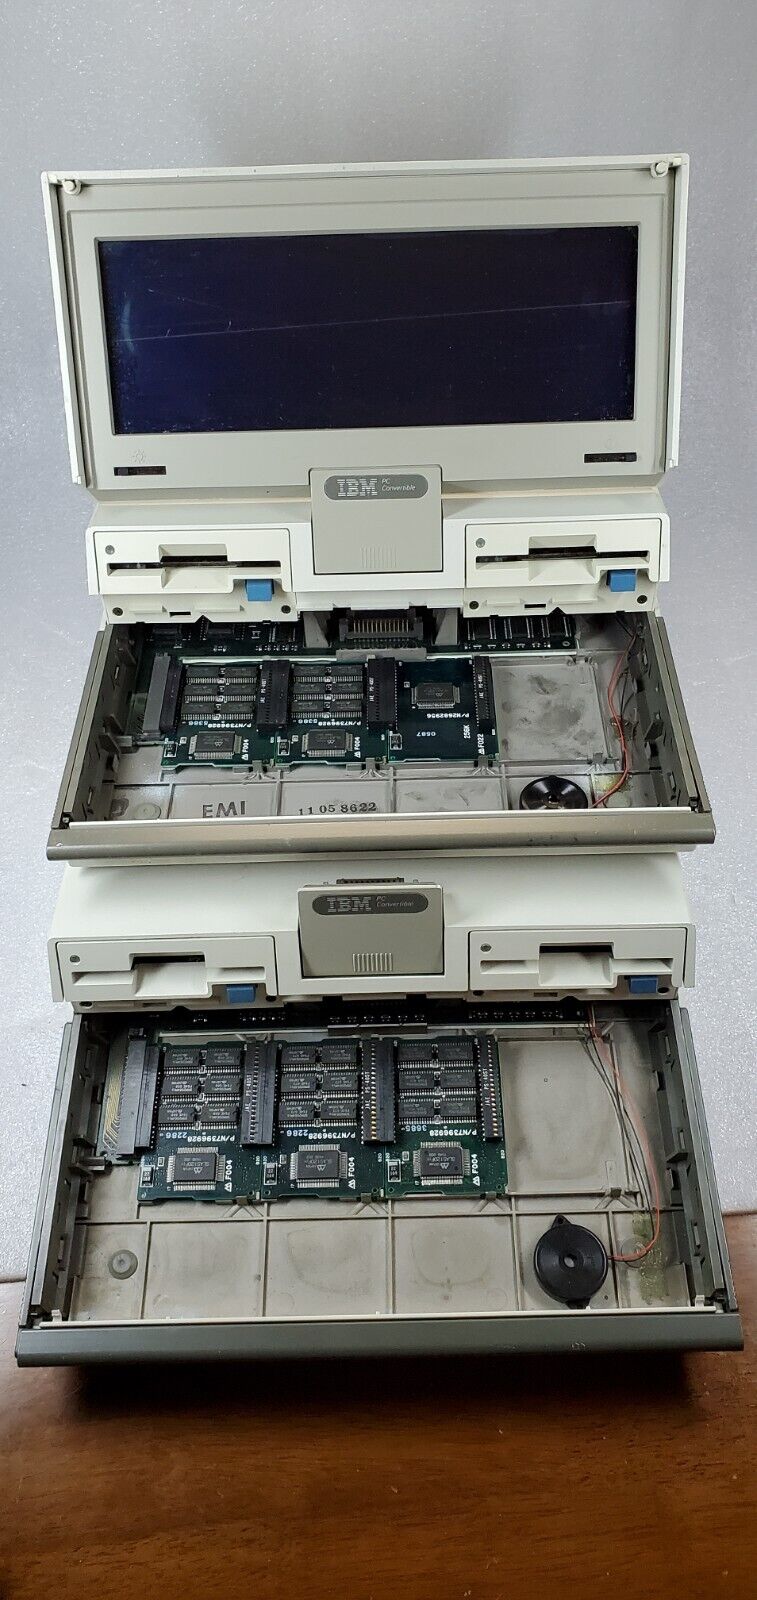 2x IBM 5140 PC Convertible Laptop Computers |  AS-IS for Parts/Repair